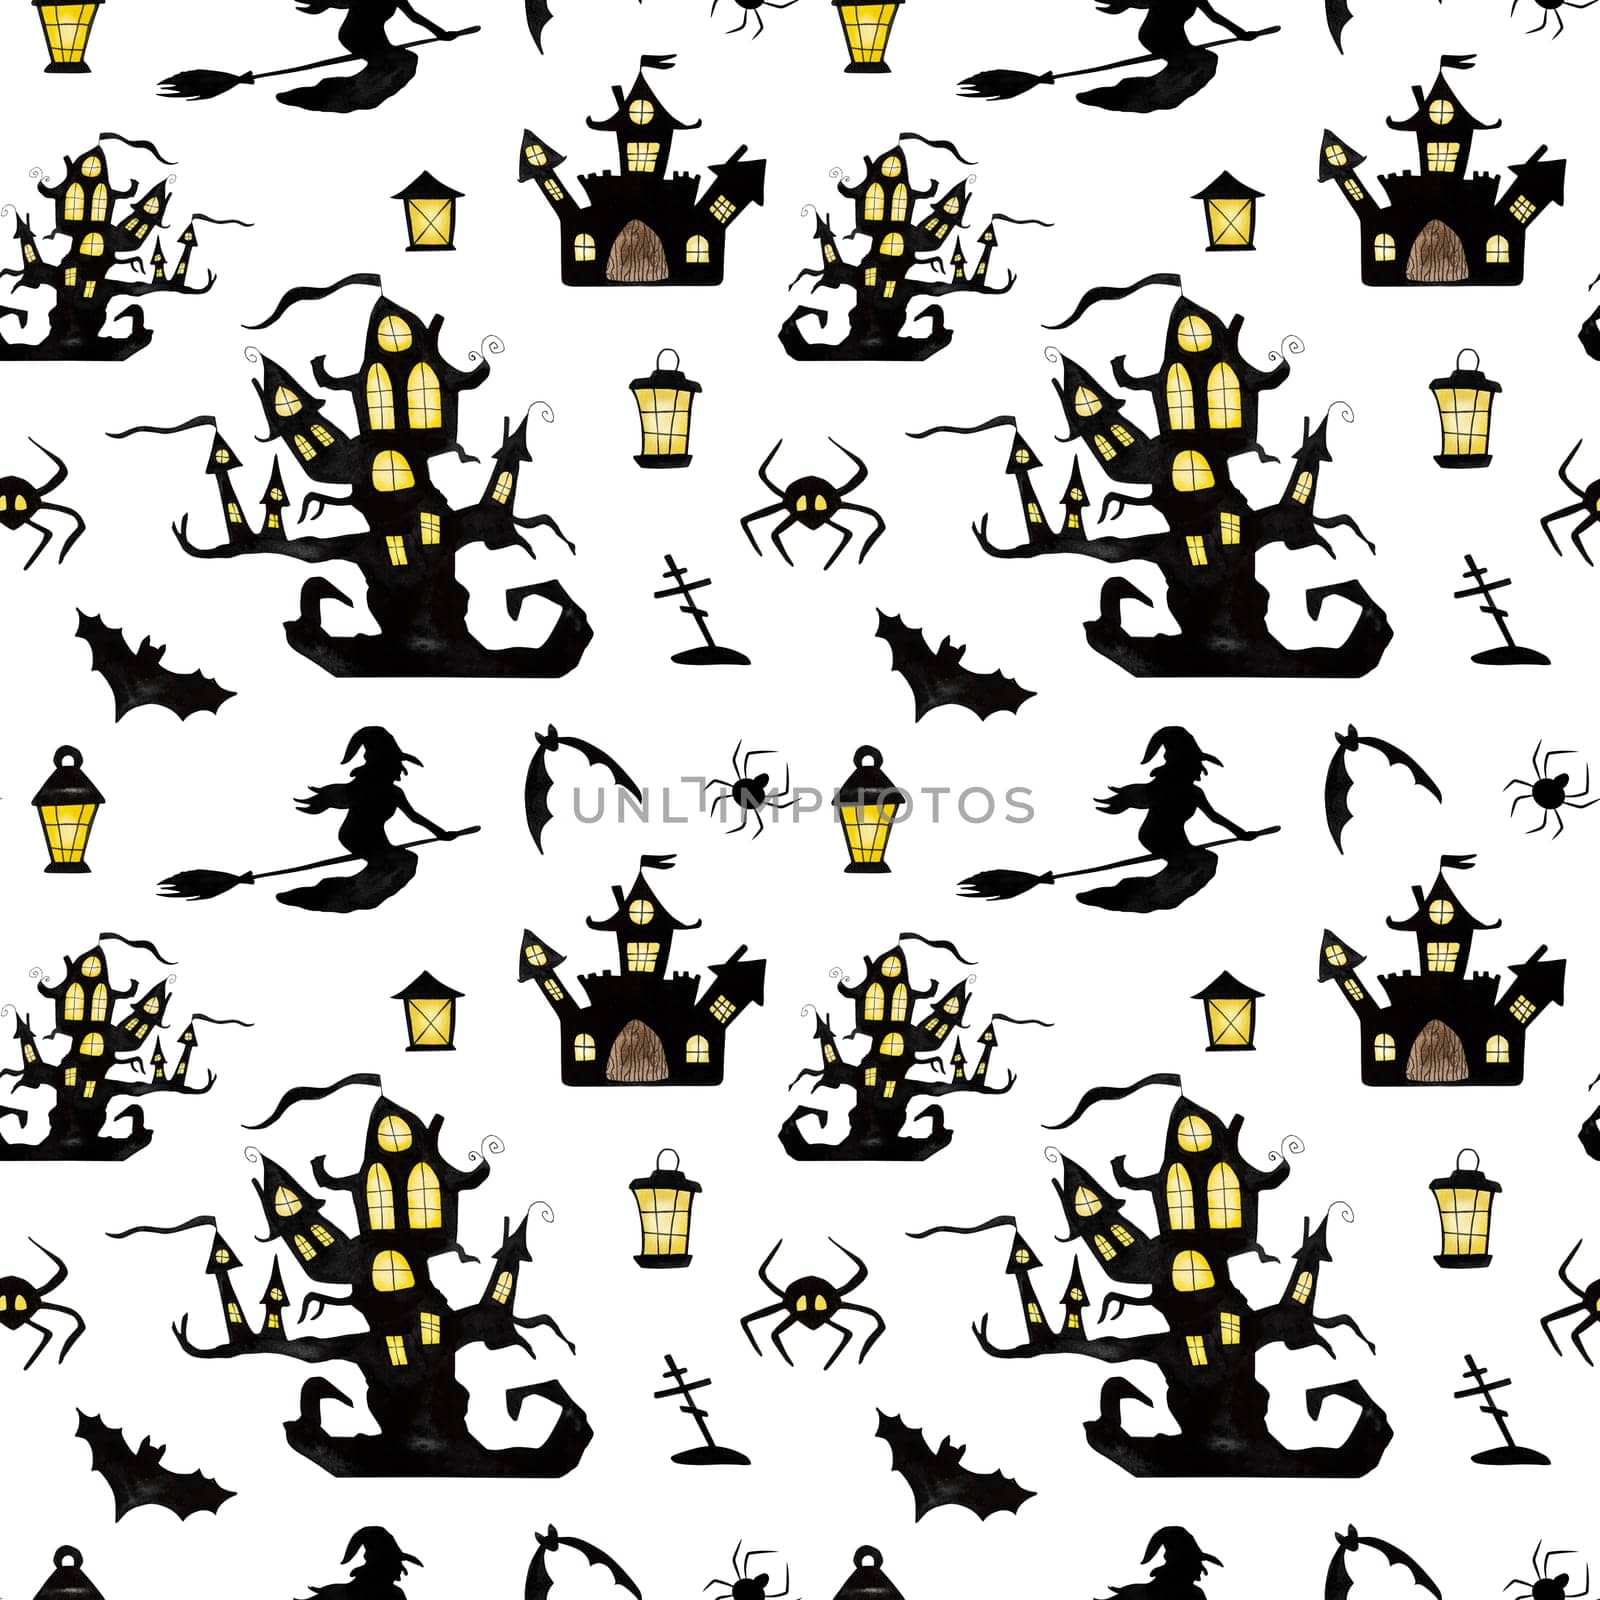 Halloween tree house with ghosts, bats and witches watercolor art seamless pattern. Creepy autumn holiday drawing